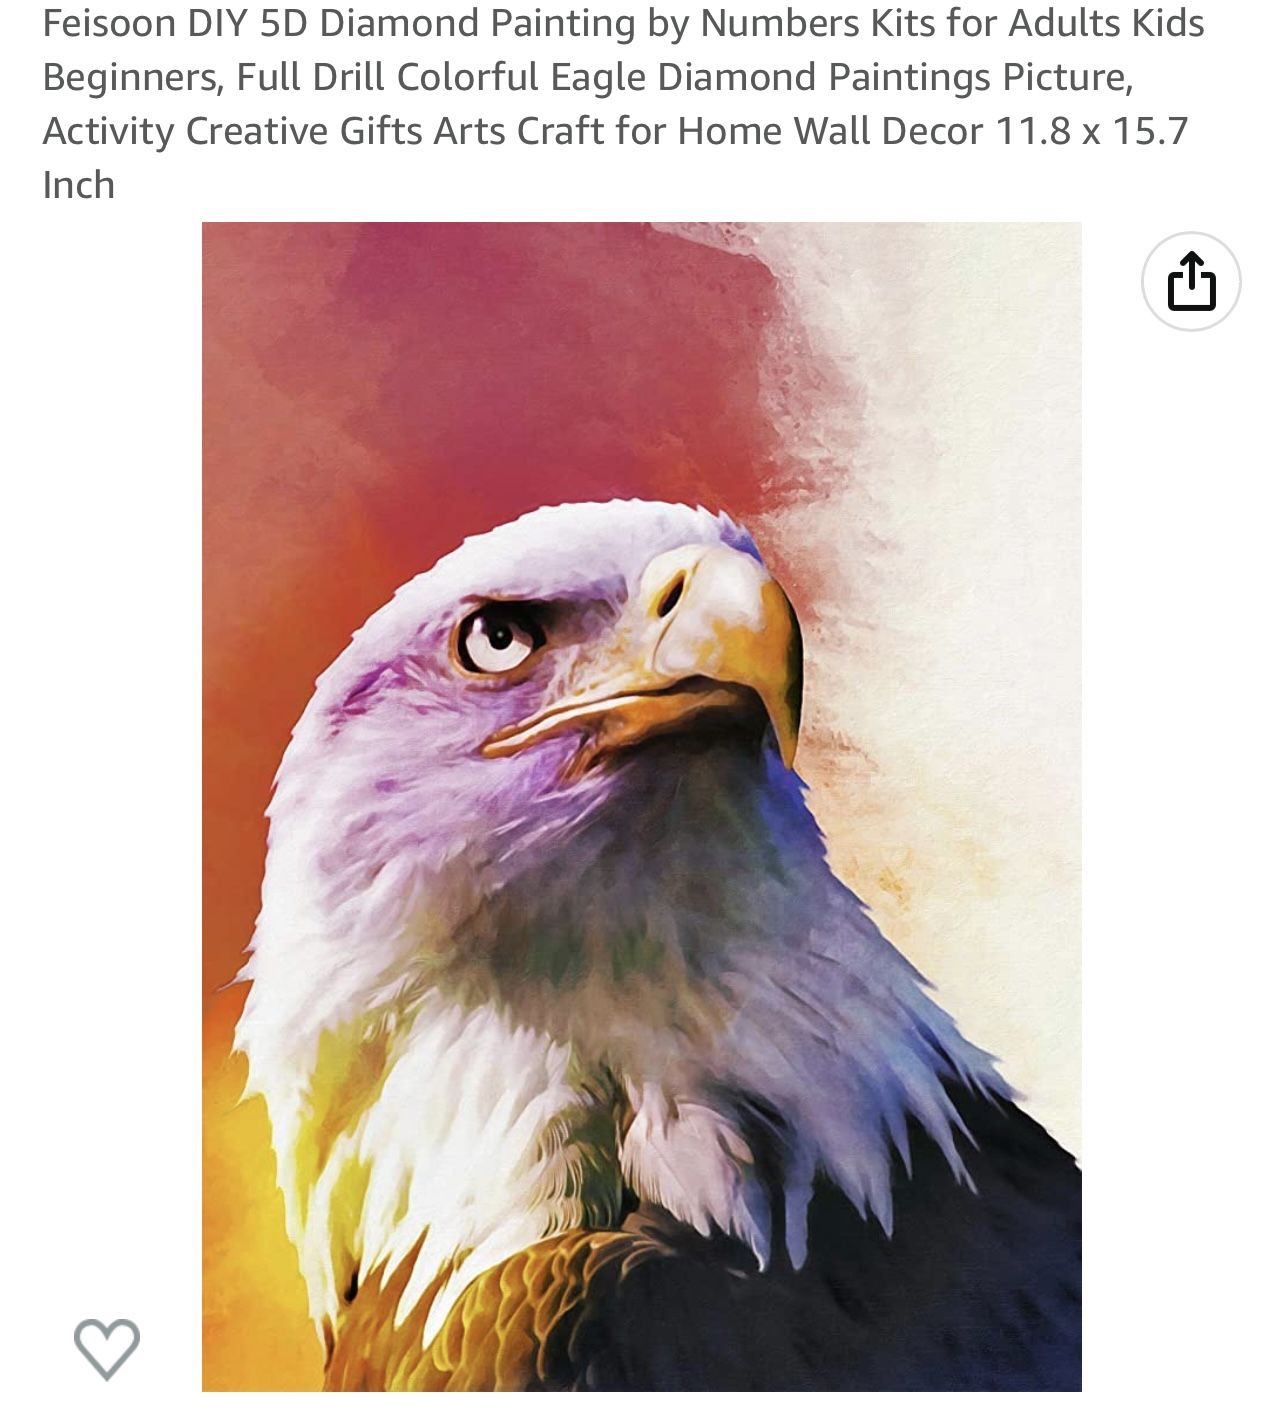 Feisoon DIY 5D Diamond Painting by Numbers Kits for Adults Kids Beginners, Full Drill Colorful Eagle Diamond Paintings Picture, Activity Creative Gift